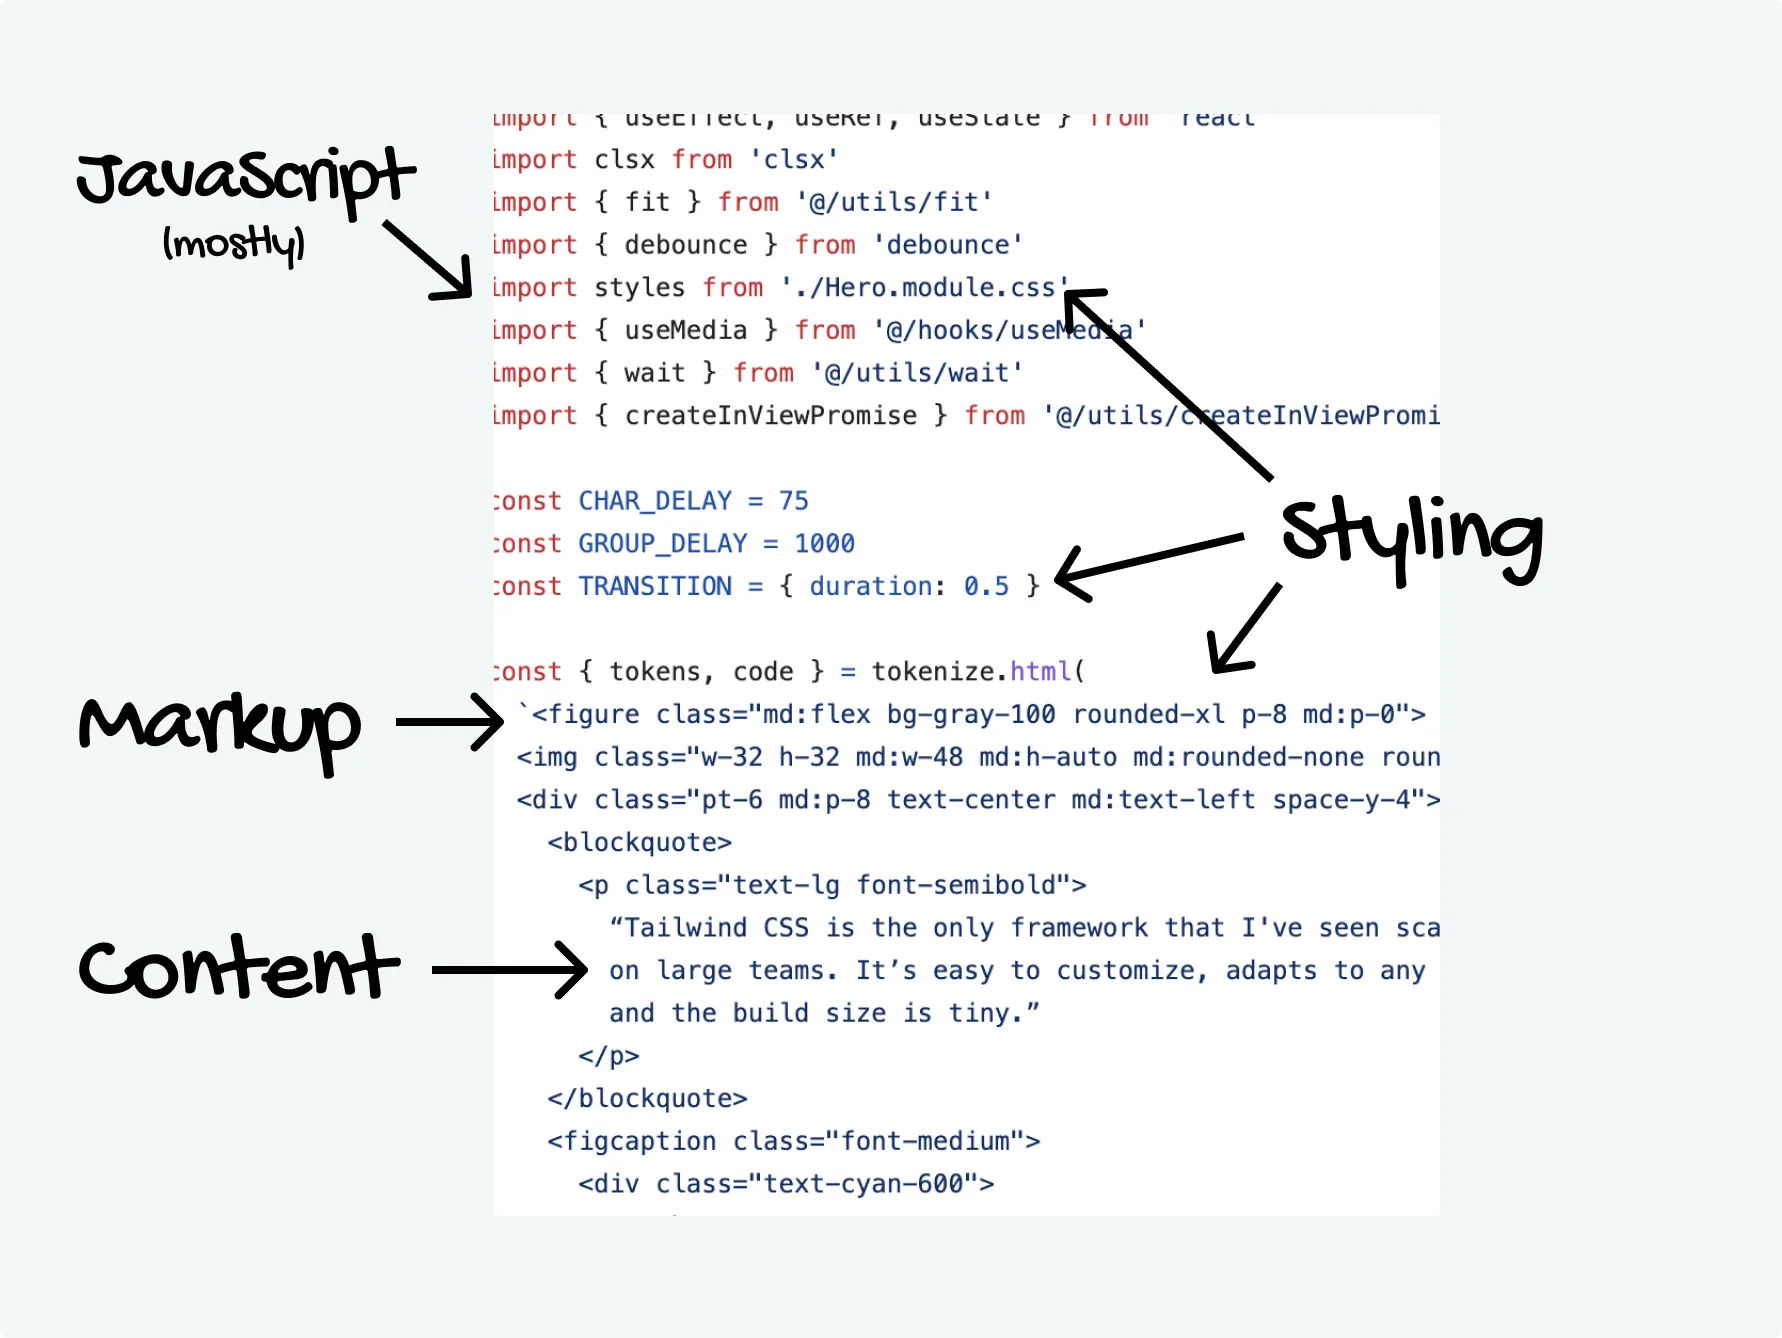 The source code of the Tailwind CSS front page